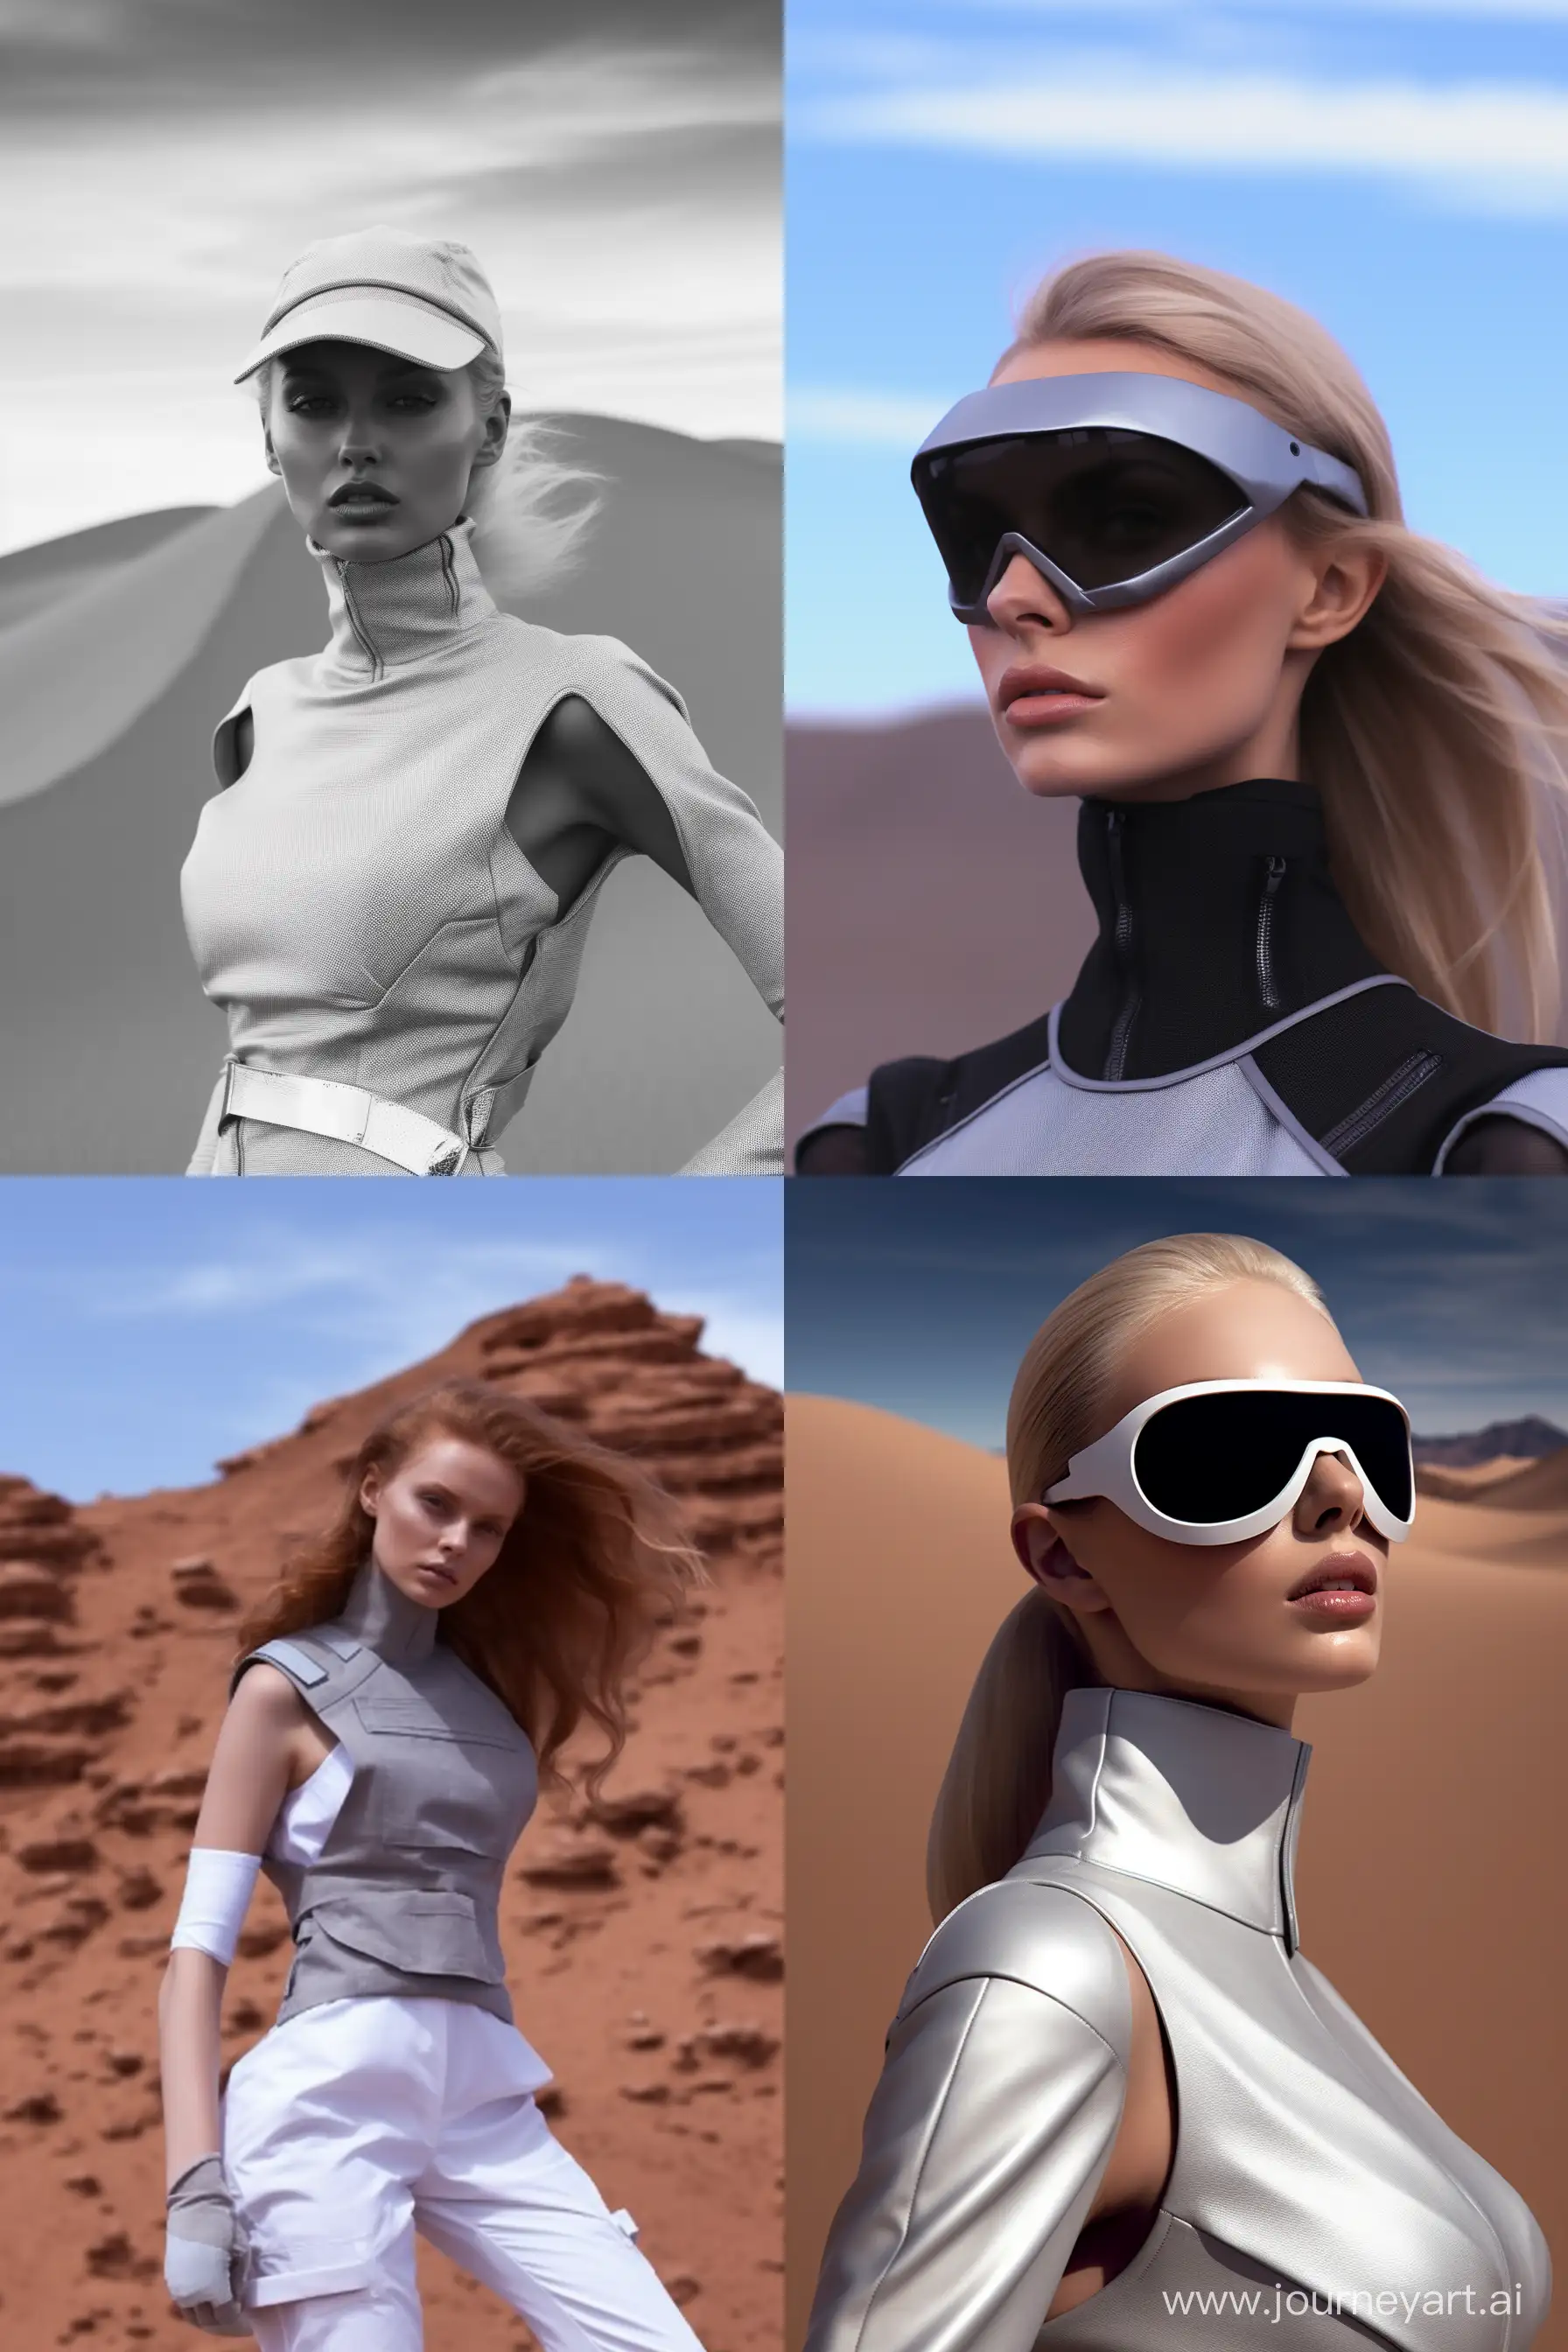 Imagine futur fashion photoshoot on Mars planet , precision in design, beauty white woman, dark grey simple and light outfit, anamorphic lens, ultra realistic, hyber detailed, fashioncore, modelcore, portrait photo captured Mario Testino. use sony a7 II camera with an 30mm lens fat F.1.2 aperture setting to blur the background and isolate the subject. use distinctive lighting on the subject’s shot. The image should be shot in ultra-high resolution. Use the Midjourney v5 with photorealism mode turned on to create an ultra-realistic image, 8k, --ar 2:3 --v 5.1